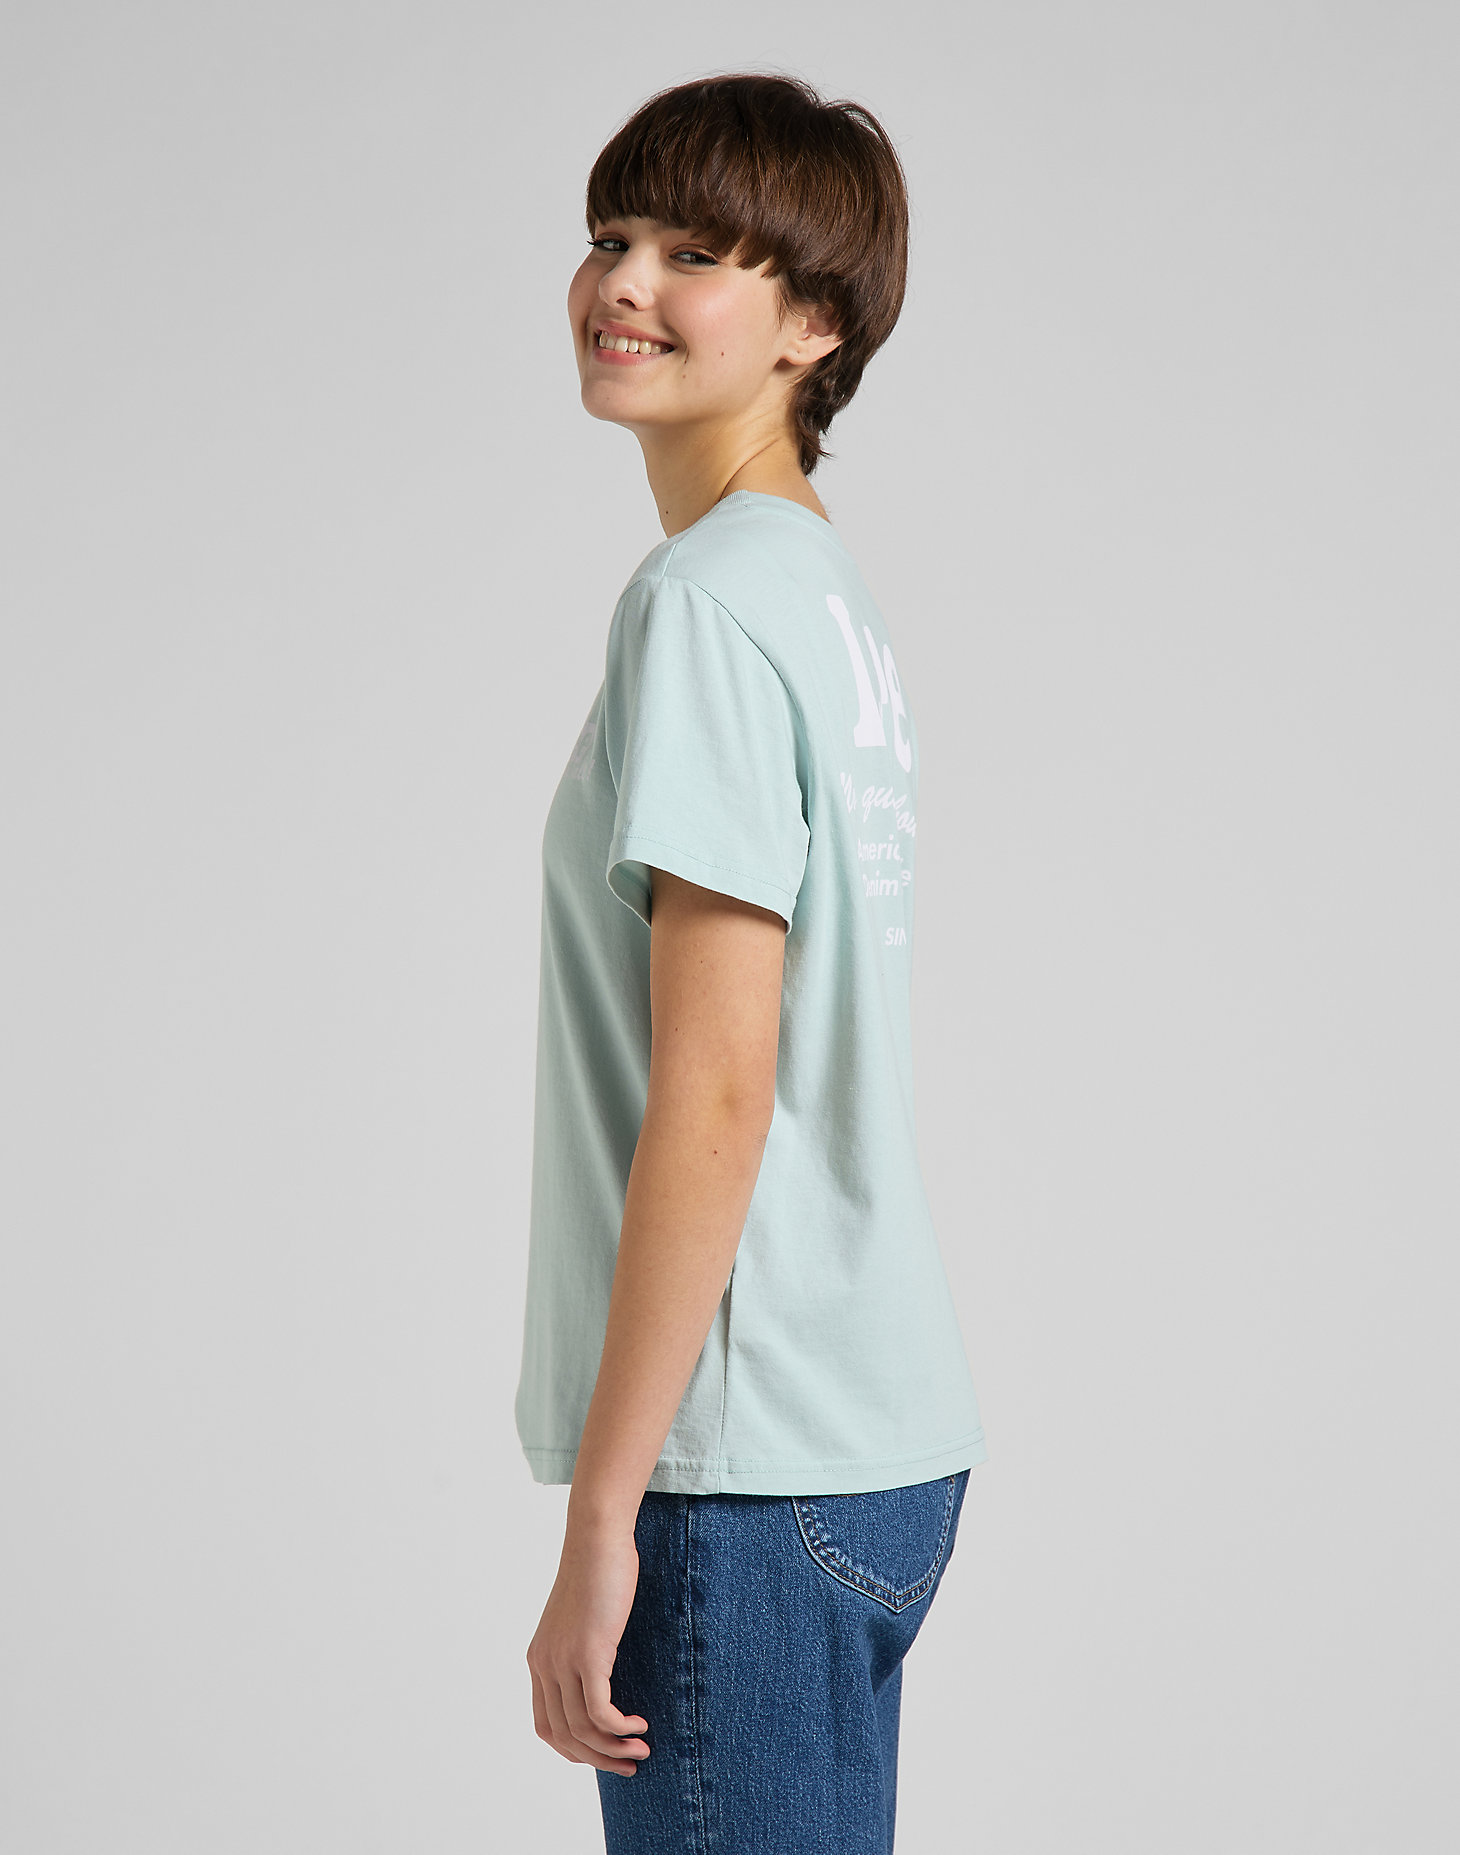 Graphic Tee in Sea Green alternative view 3